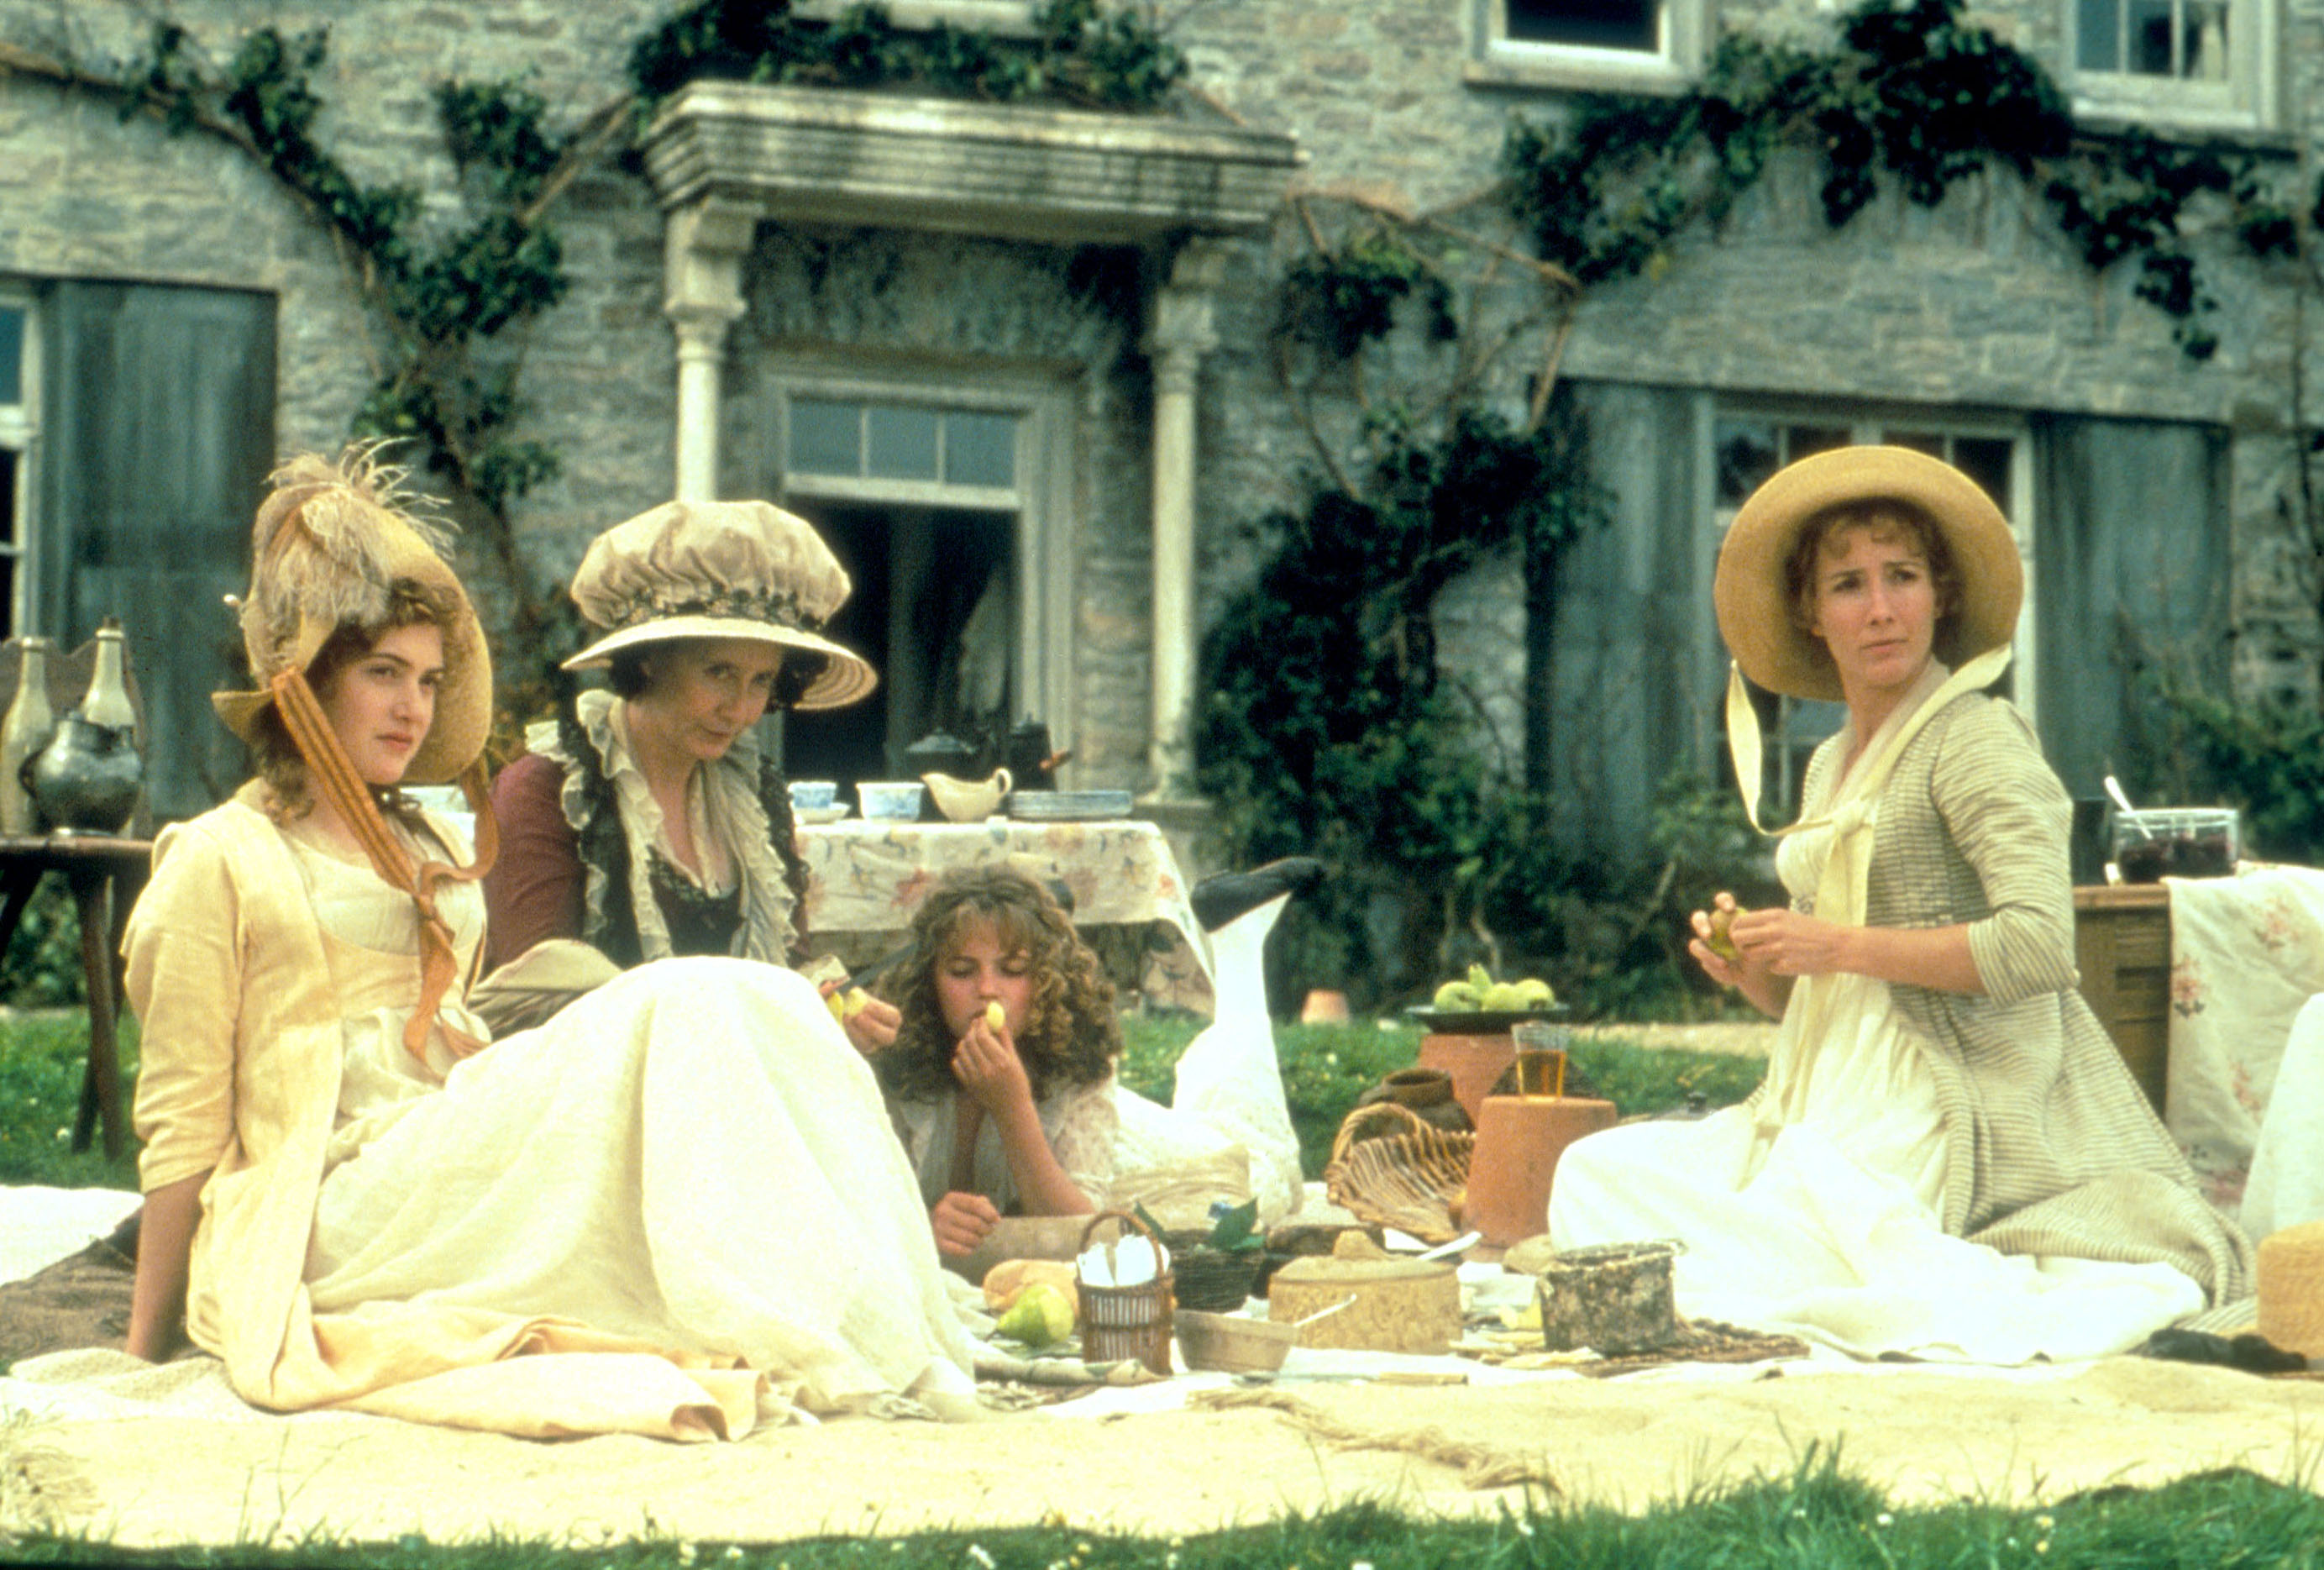 Members of the Dashwood family having a picnic in the 1995 movie adaptation of Jane Austen's Sense and Sensibility